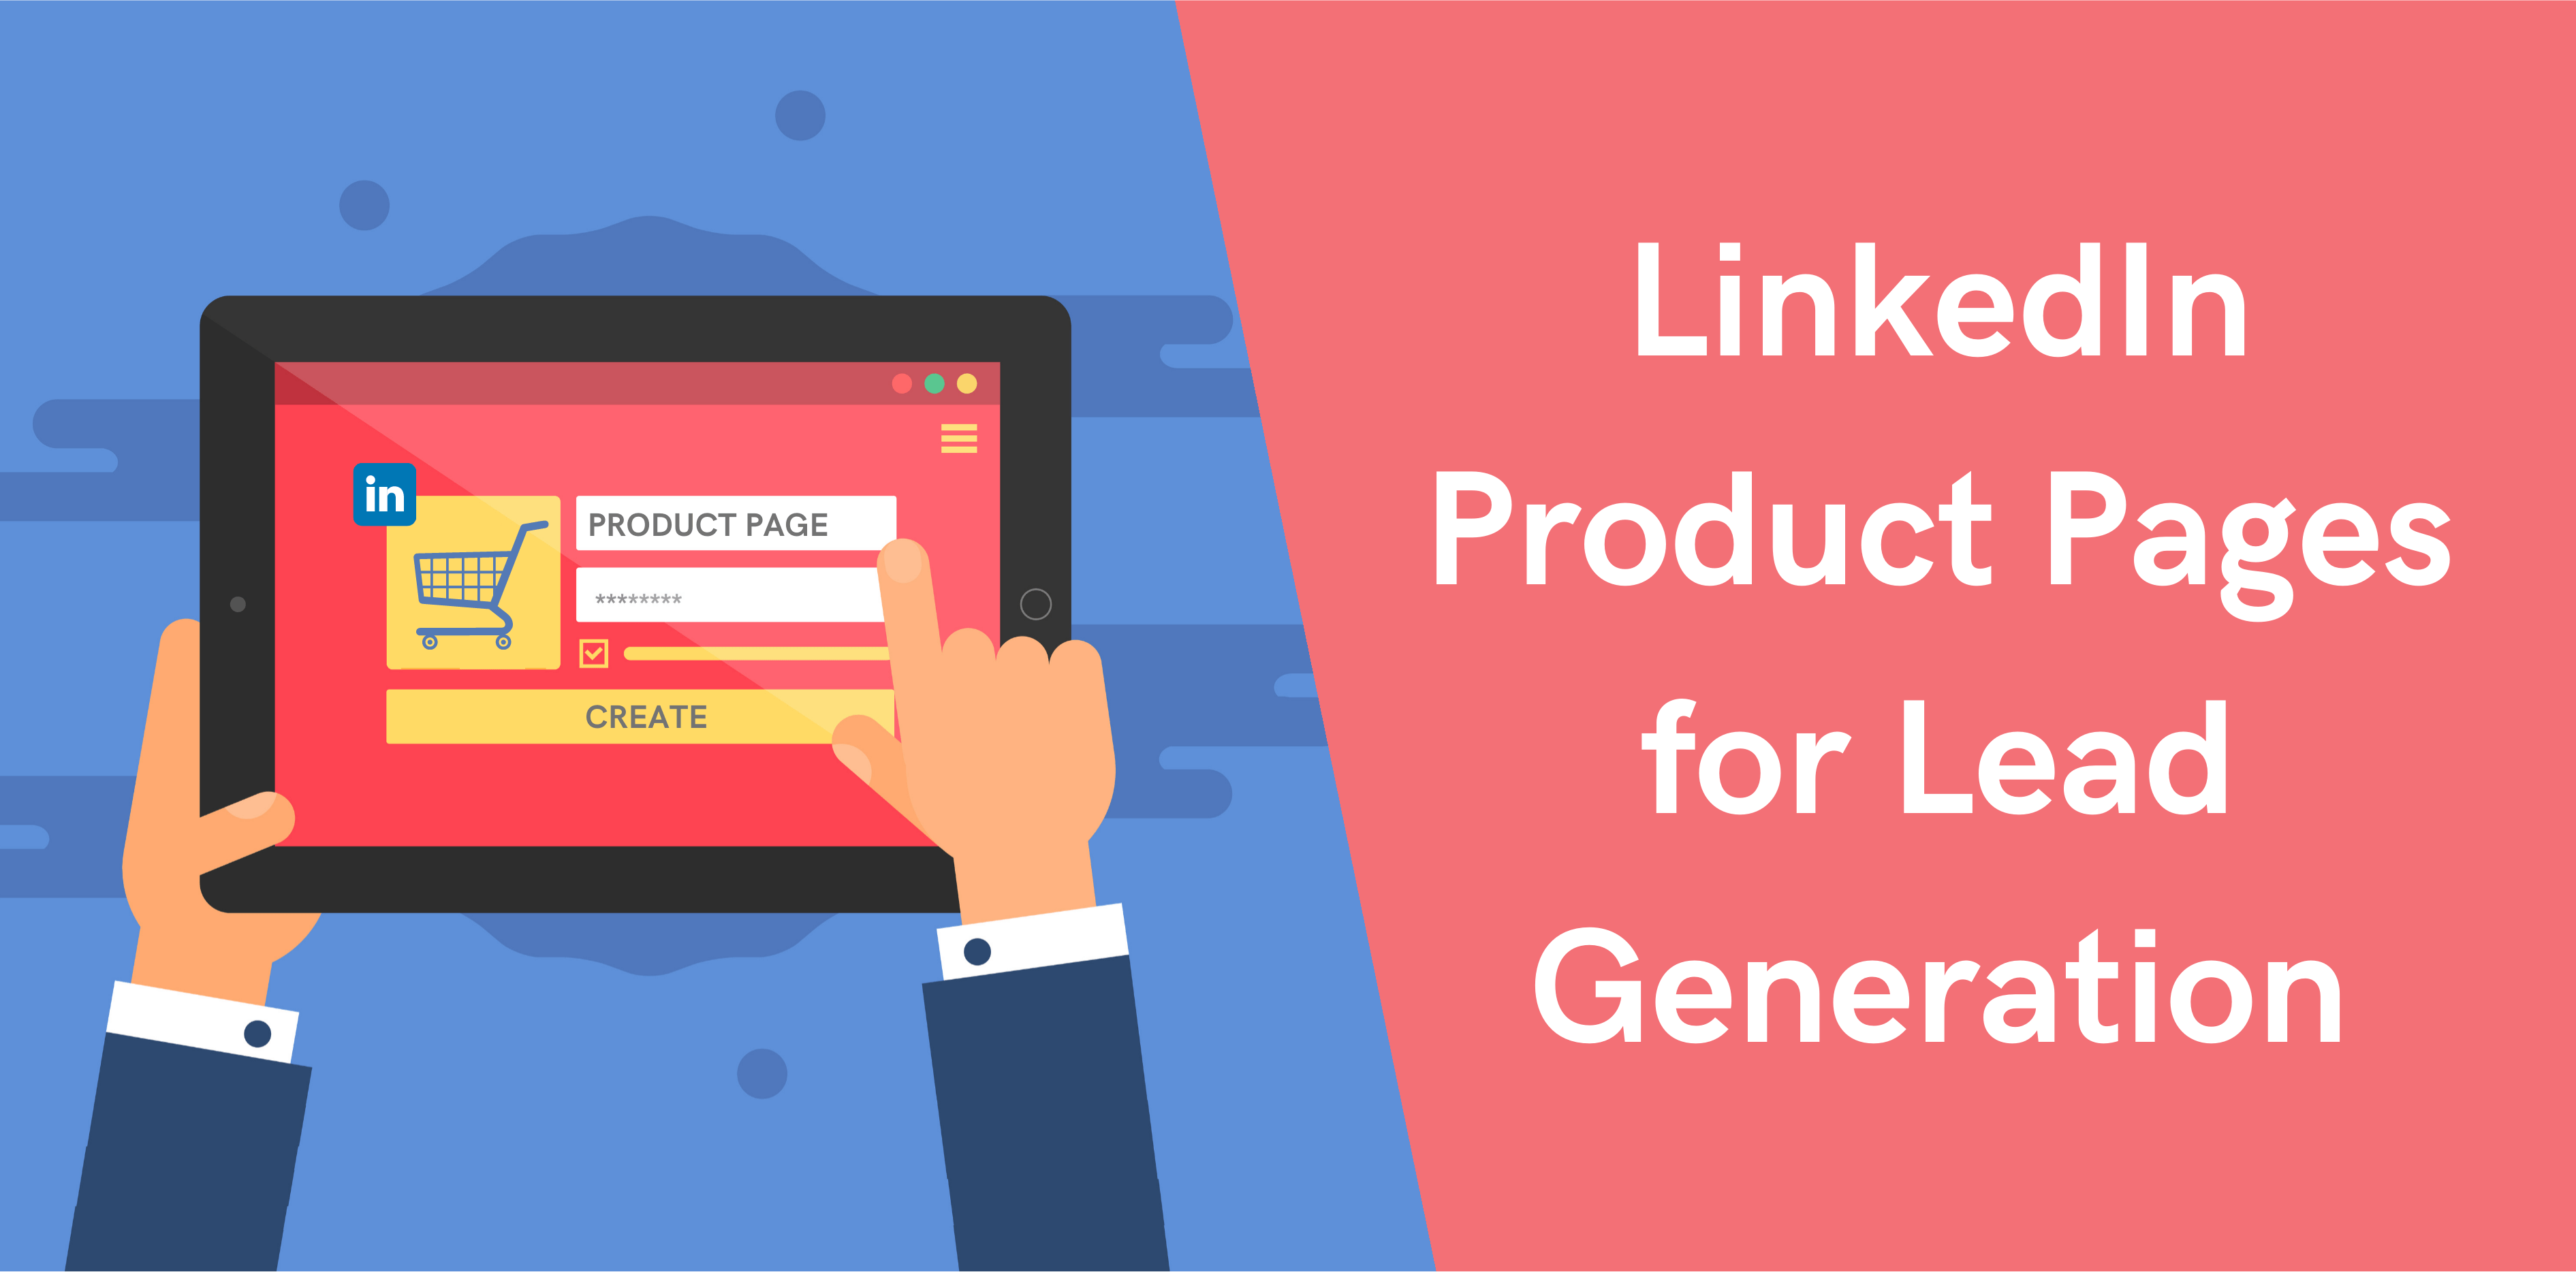 Thumbnail-LinkedIn-Product-Pages-for-Lead-Generation